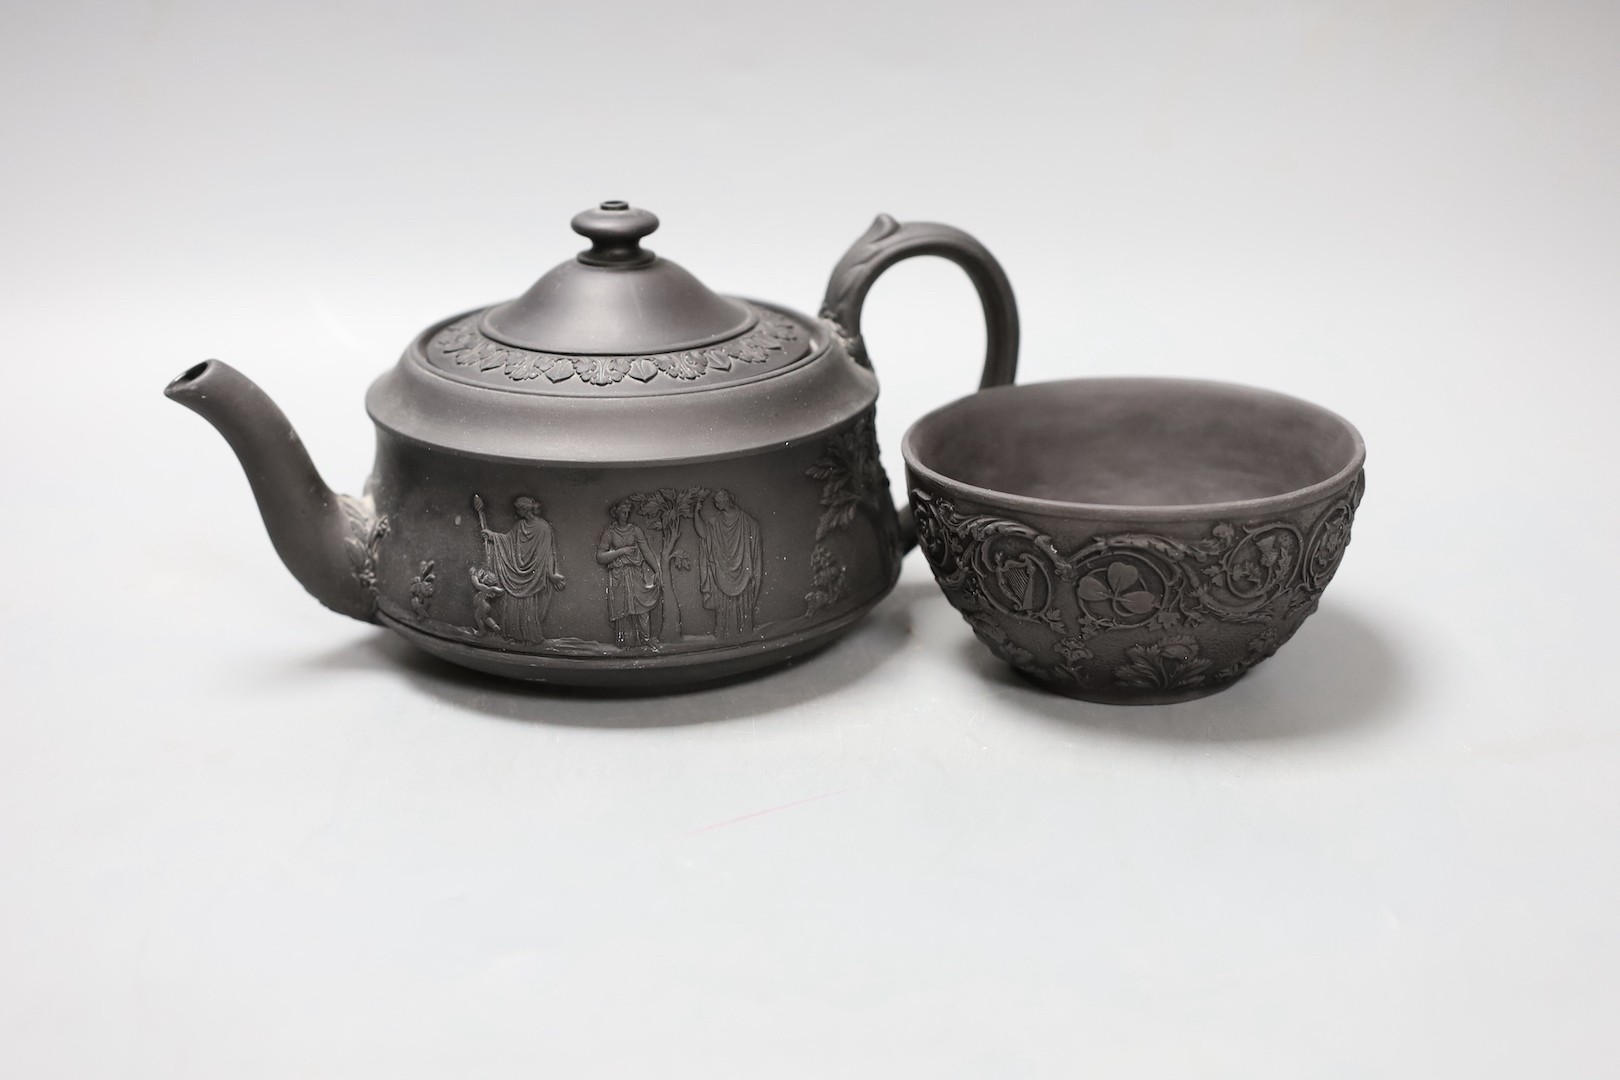 A Wedgwood black basalt 'Union' sugar bowl, early 19th century and a teapot and cover 10cm tall